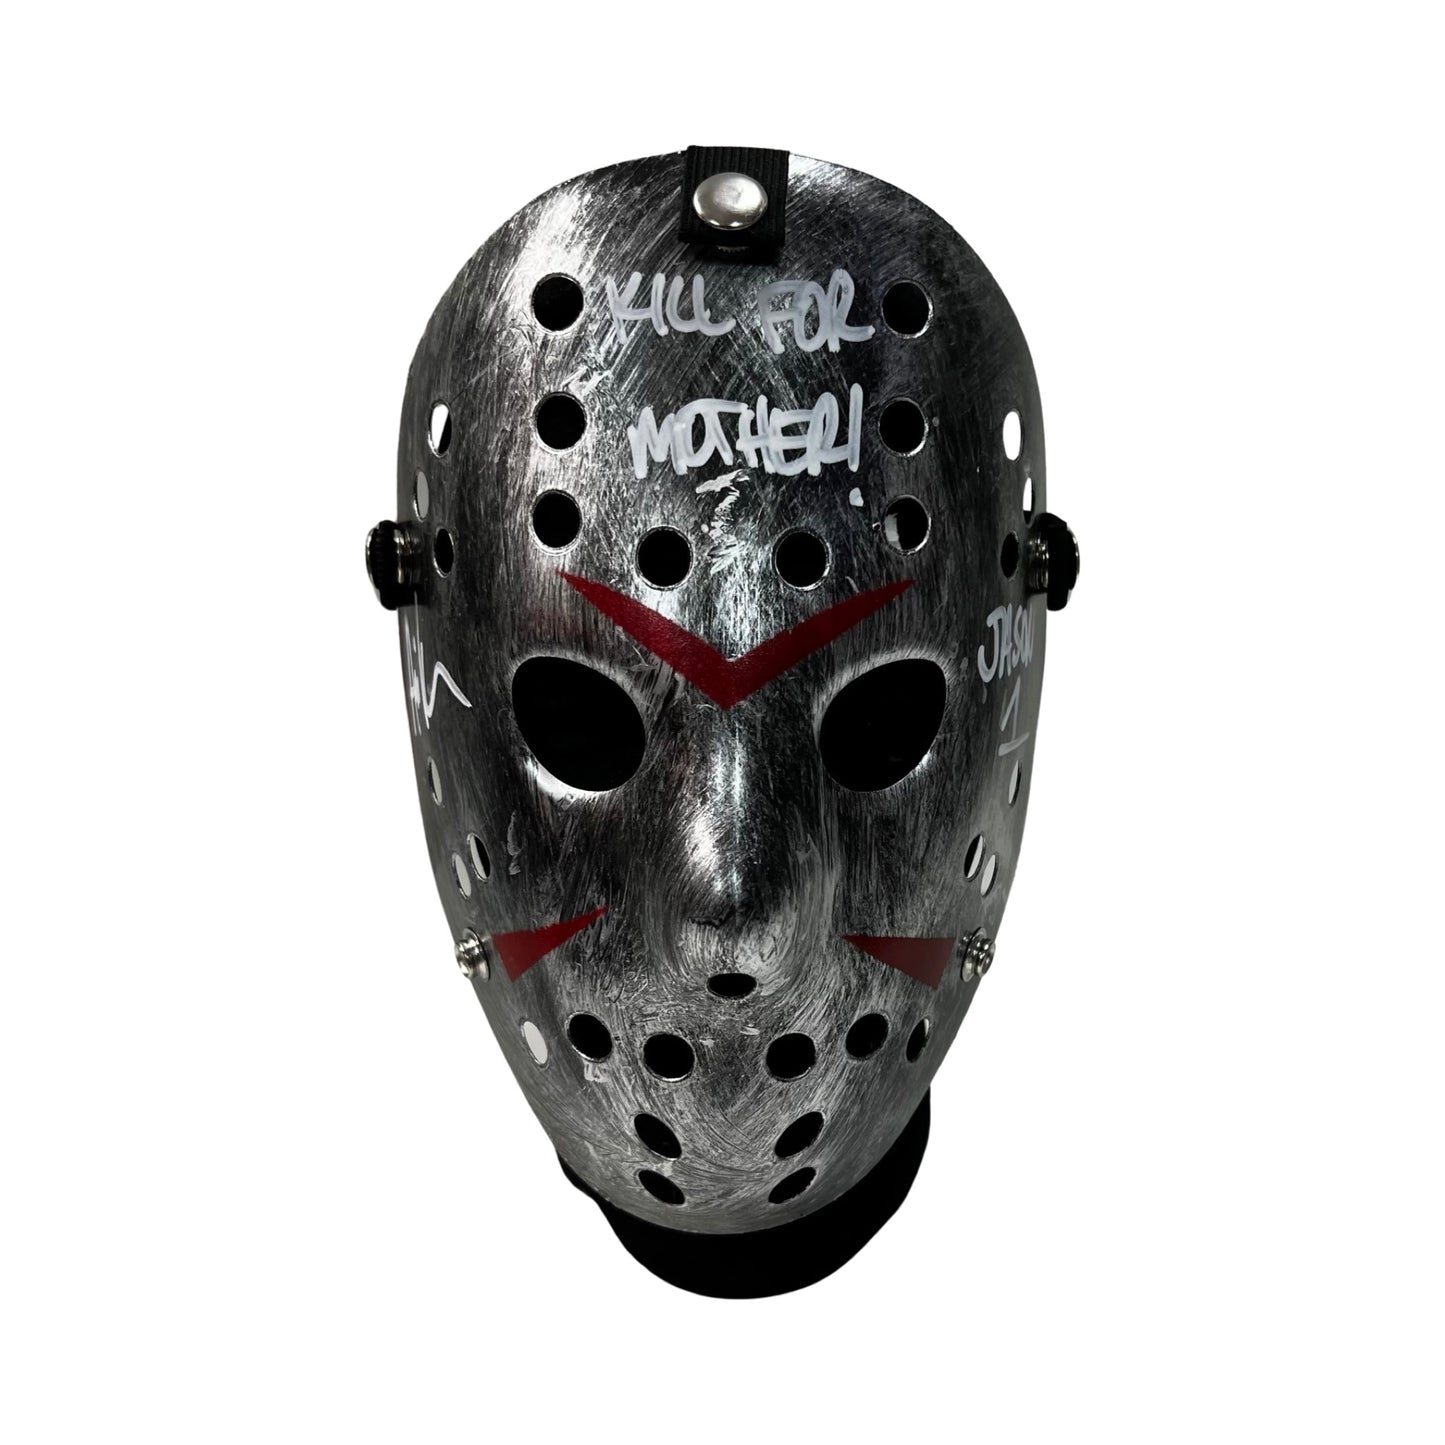 Ari Lehman Autographed Jason Voorhees Friday the 13th Silver Mask “Kill for Mother!, Jason 1” Inscriptions White Ink Steiner CX